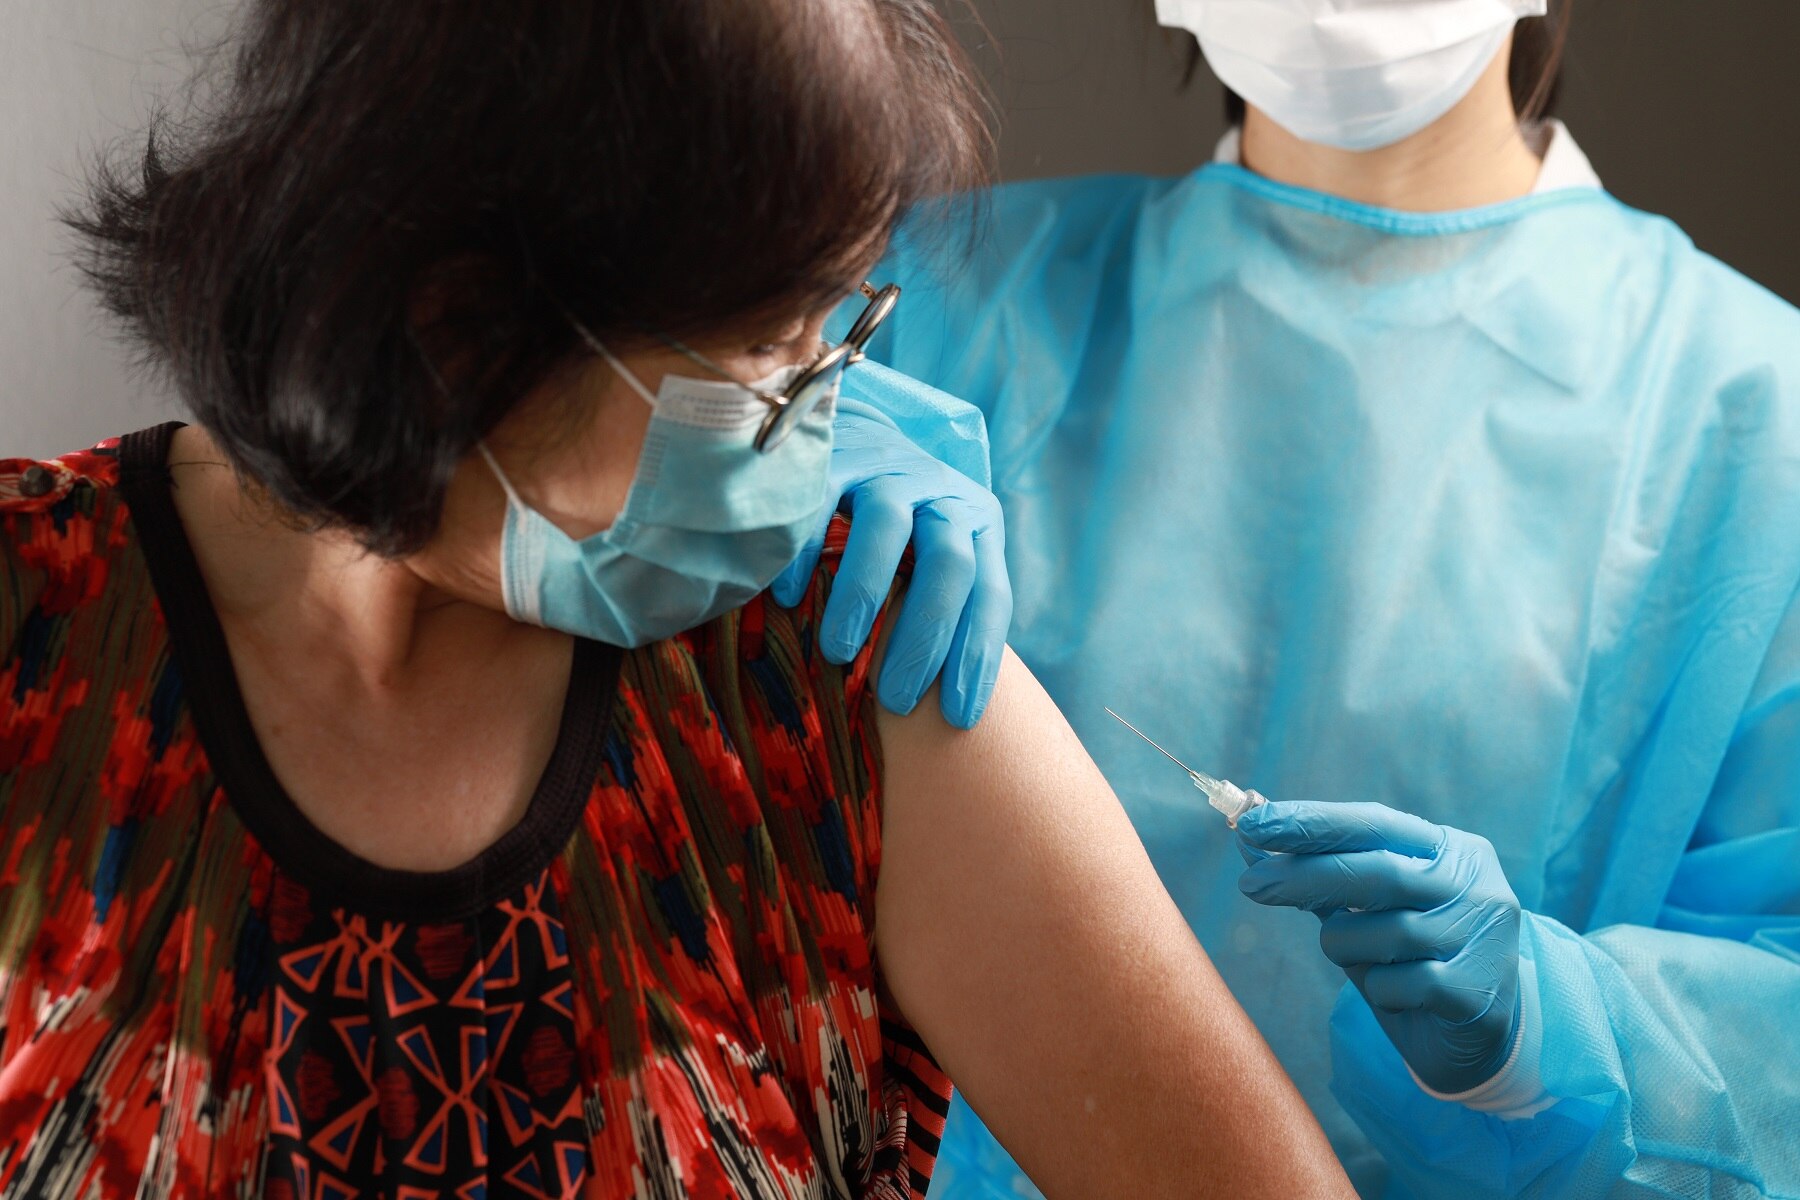 Syringe needle and vaccine in the hands of a nurse. Preparation of coronavirus vaccine for senior